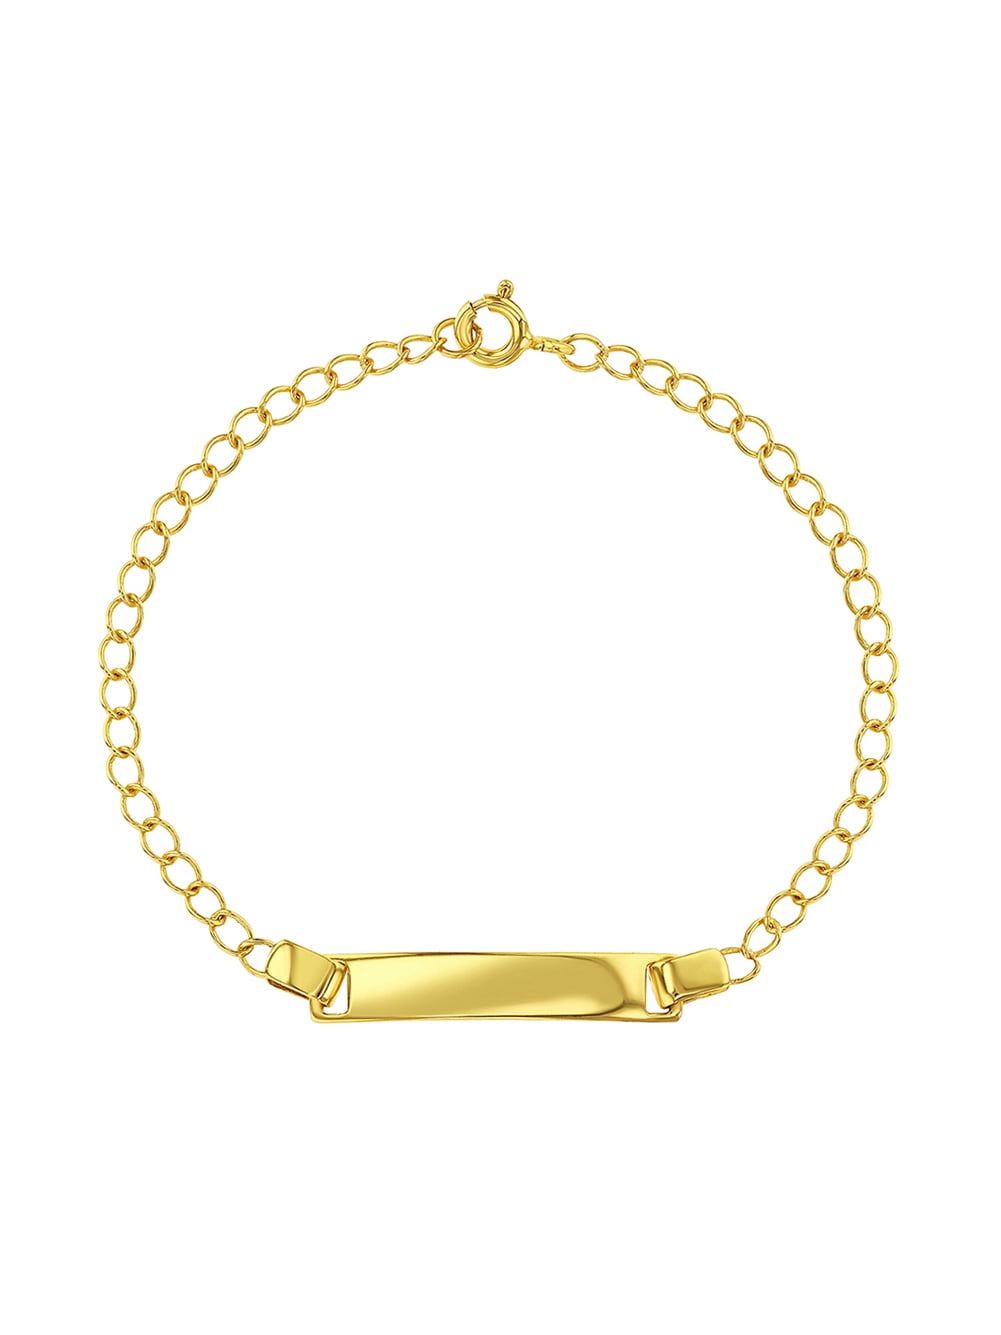 Christmas Stocking Stuffer Gold Plated Tag ID Identification Bracelet 6in 